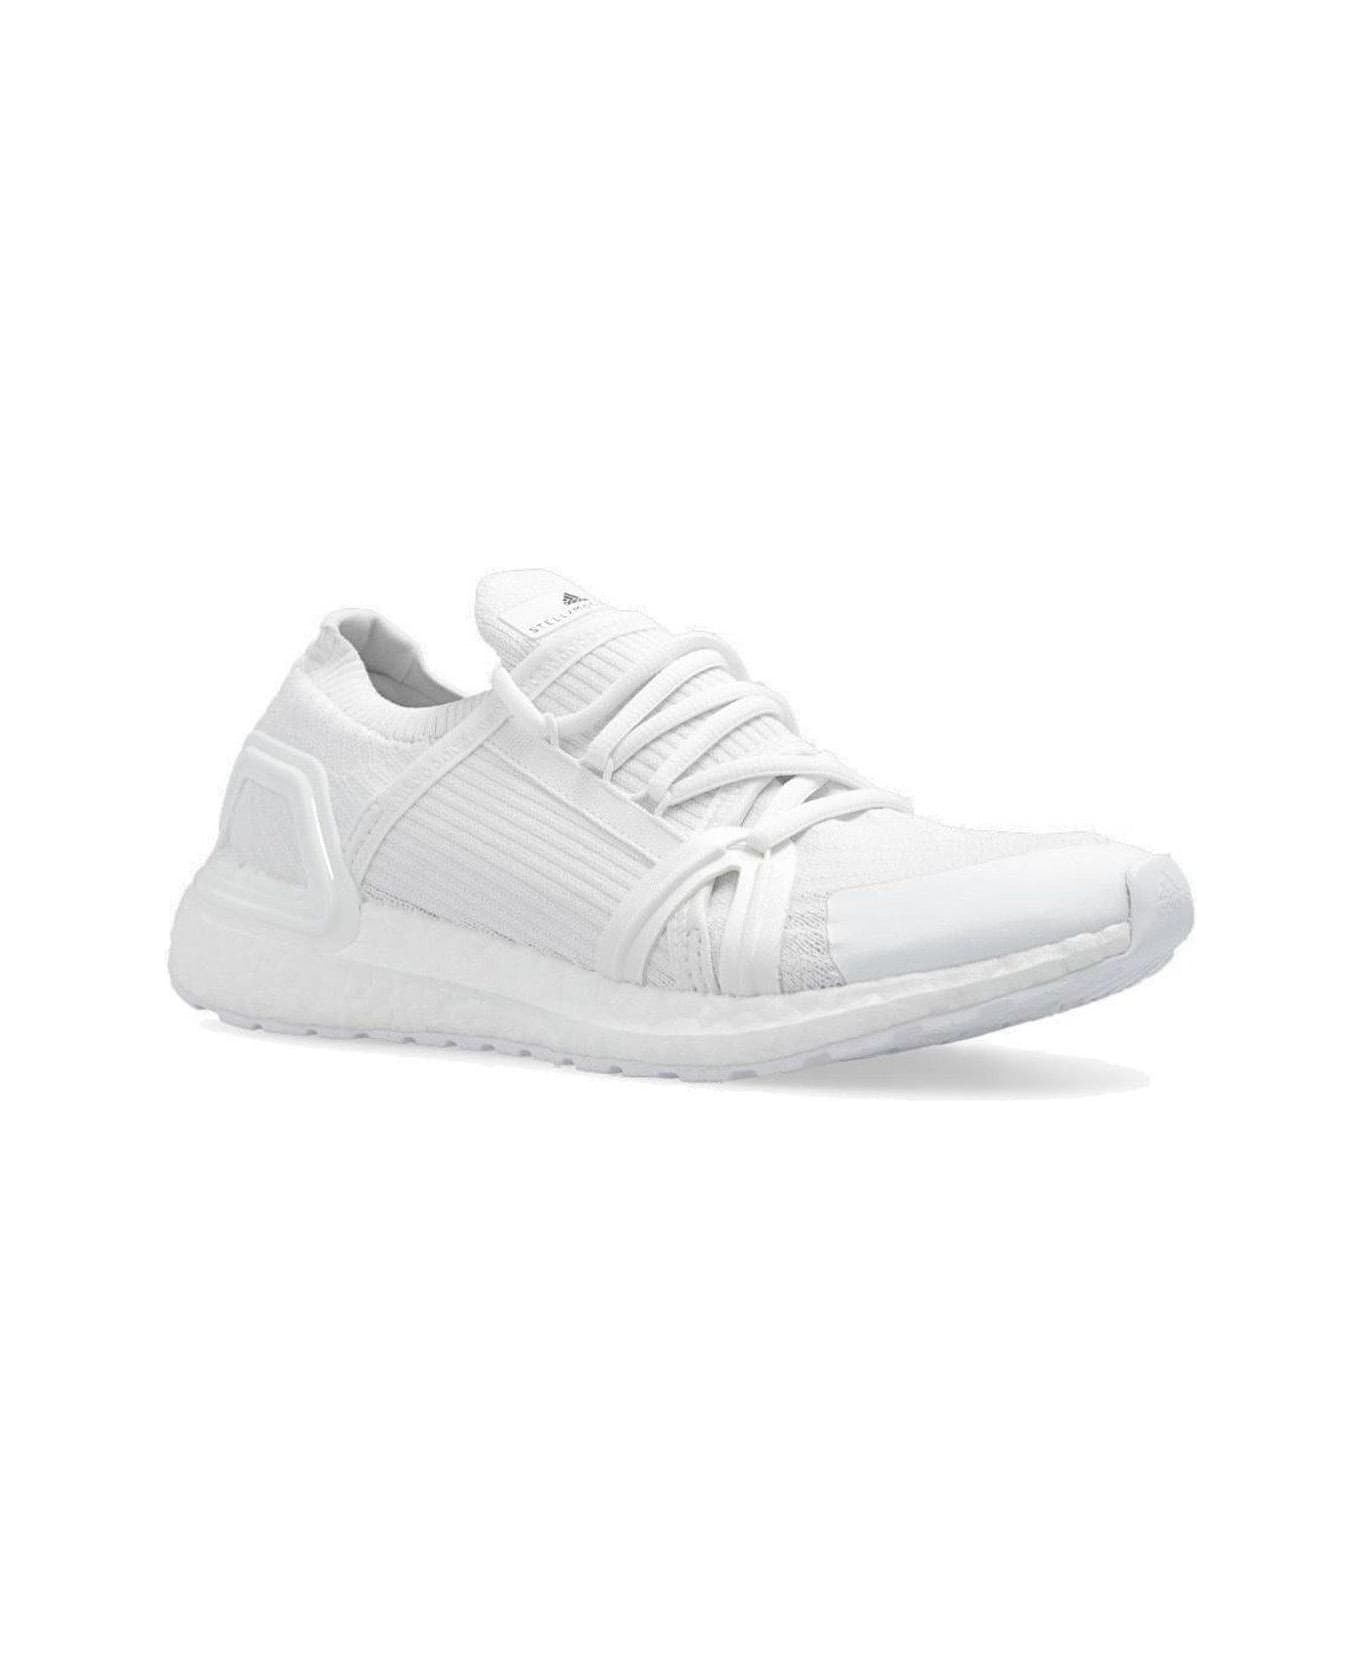 Adidas by Stella McCartney Ultraboost 20 Lace-up Sneakers - White スニーカー